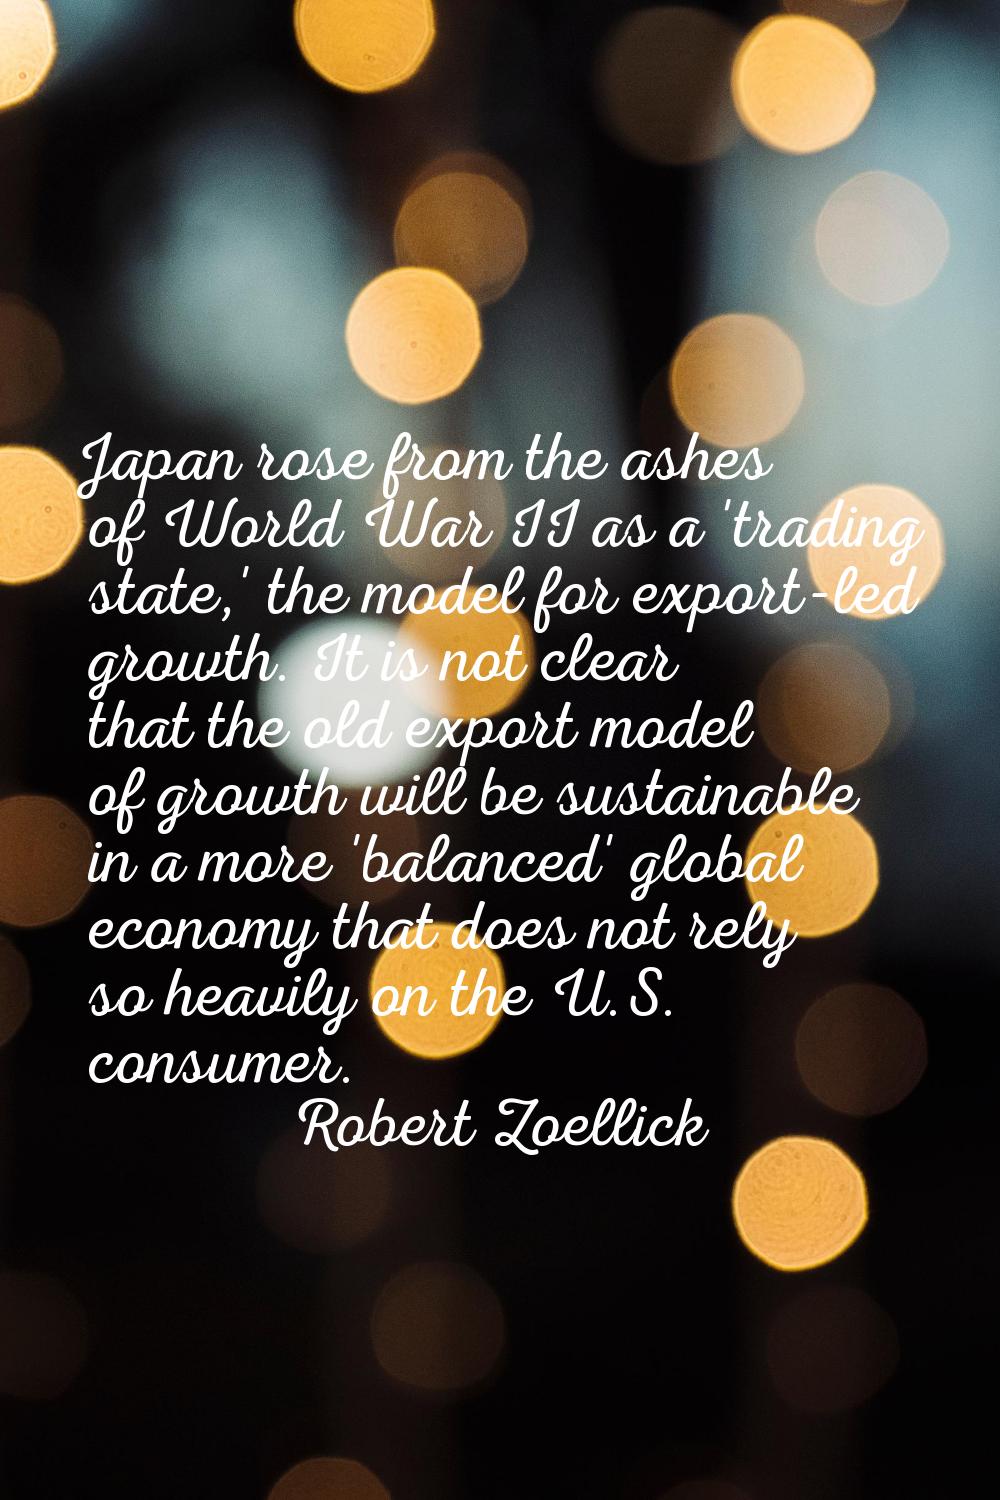 Japan rose from the ashes of World War II as a 'trading state,' the model for export-led growth. It